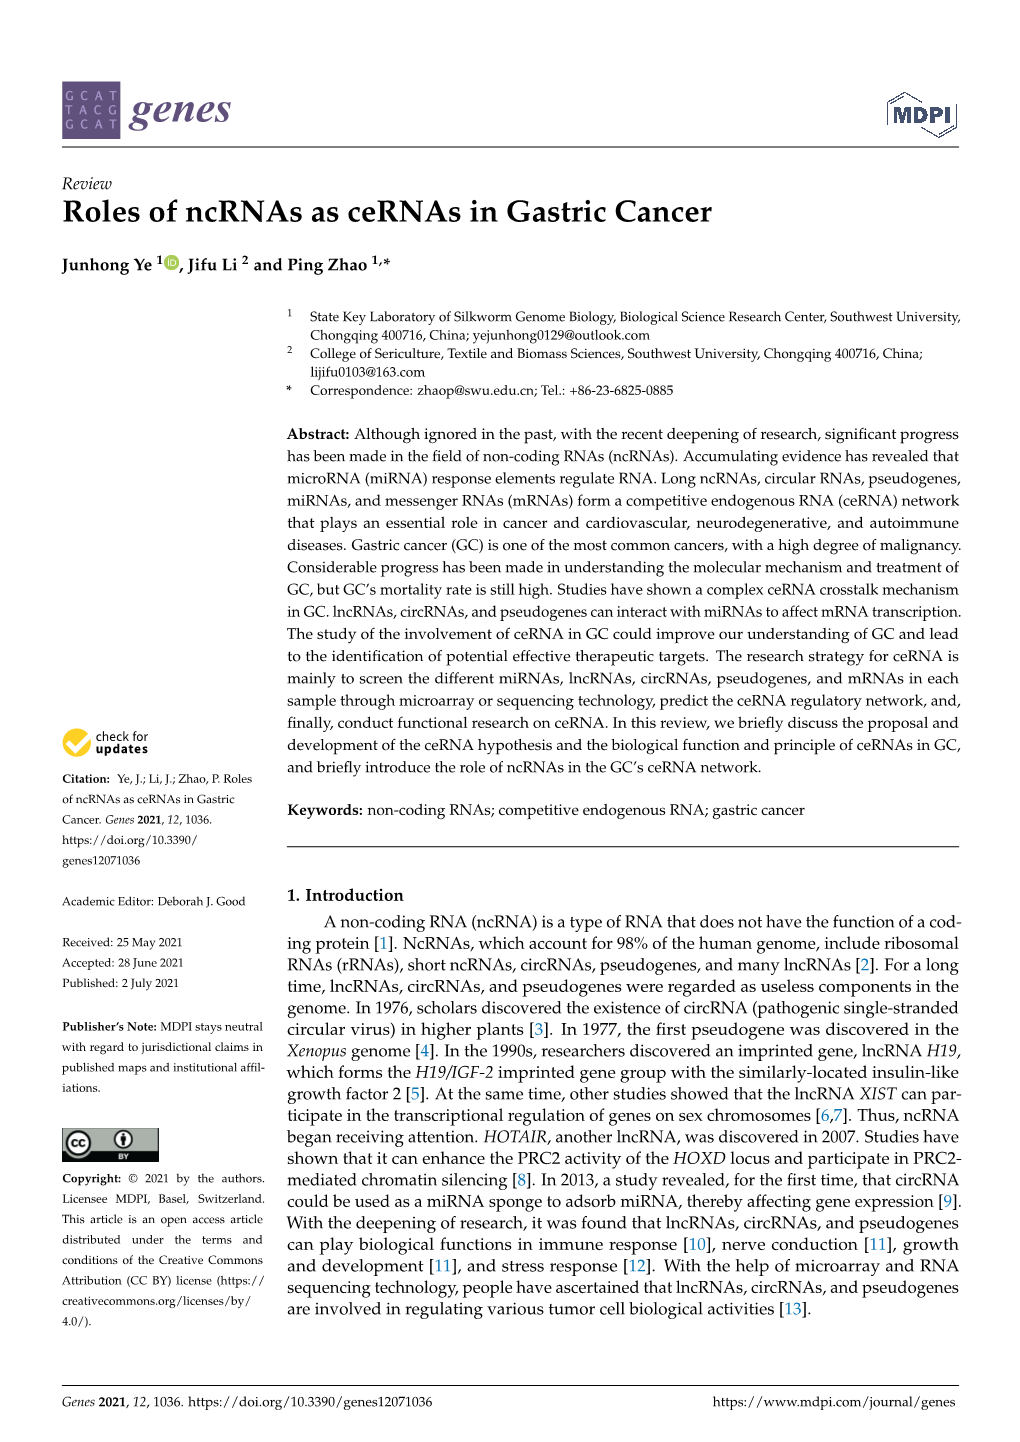 Roles of Ncrnas As Cernas in Gastric Cancer